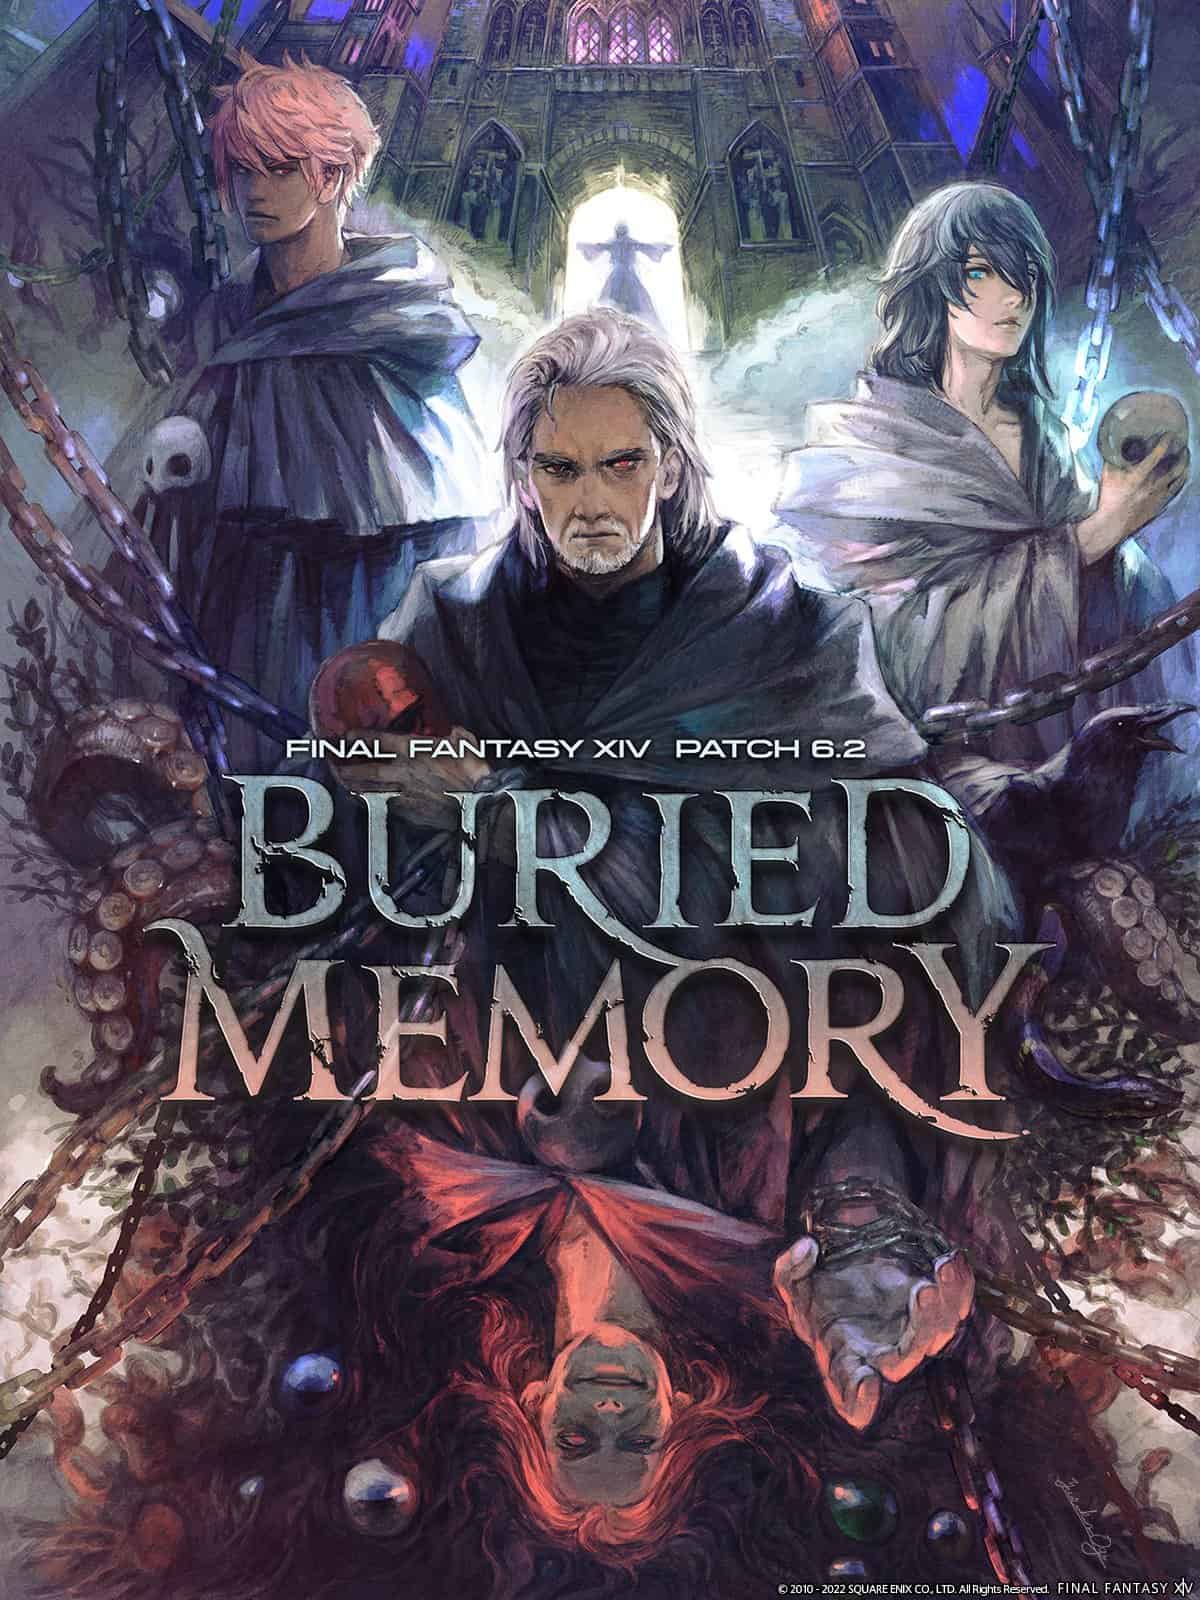 The main visual for the upcoming Final Fantasy XIV patch 6.2, Buried Memory. 